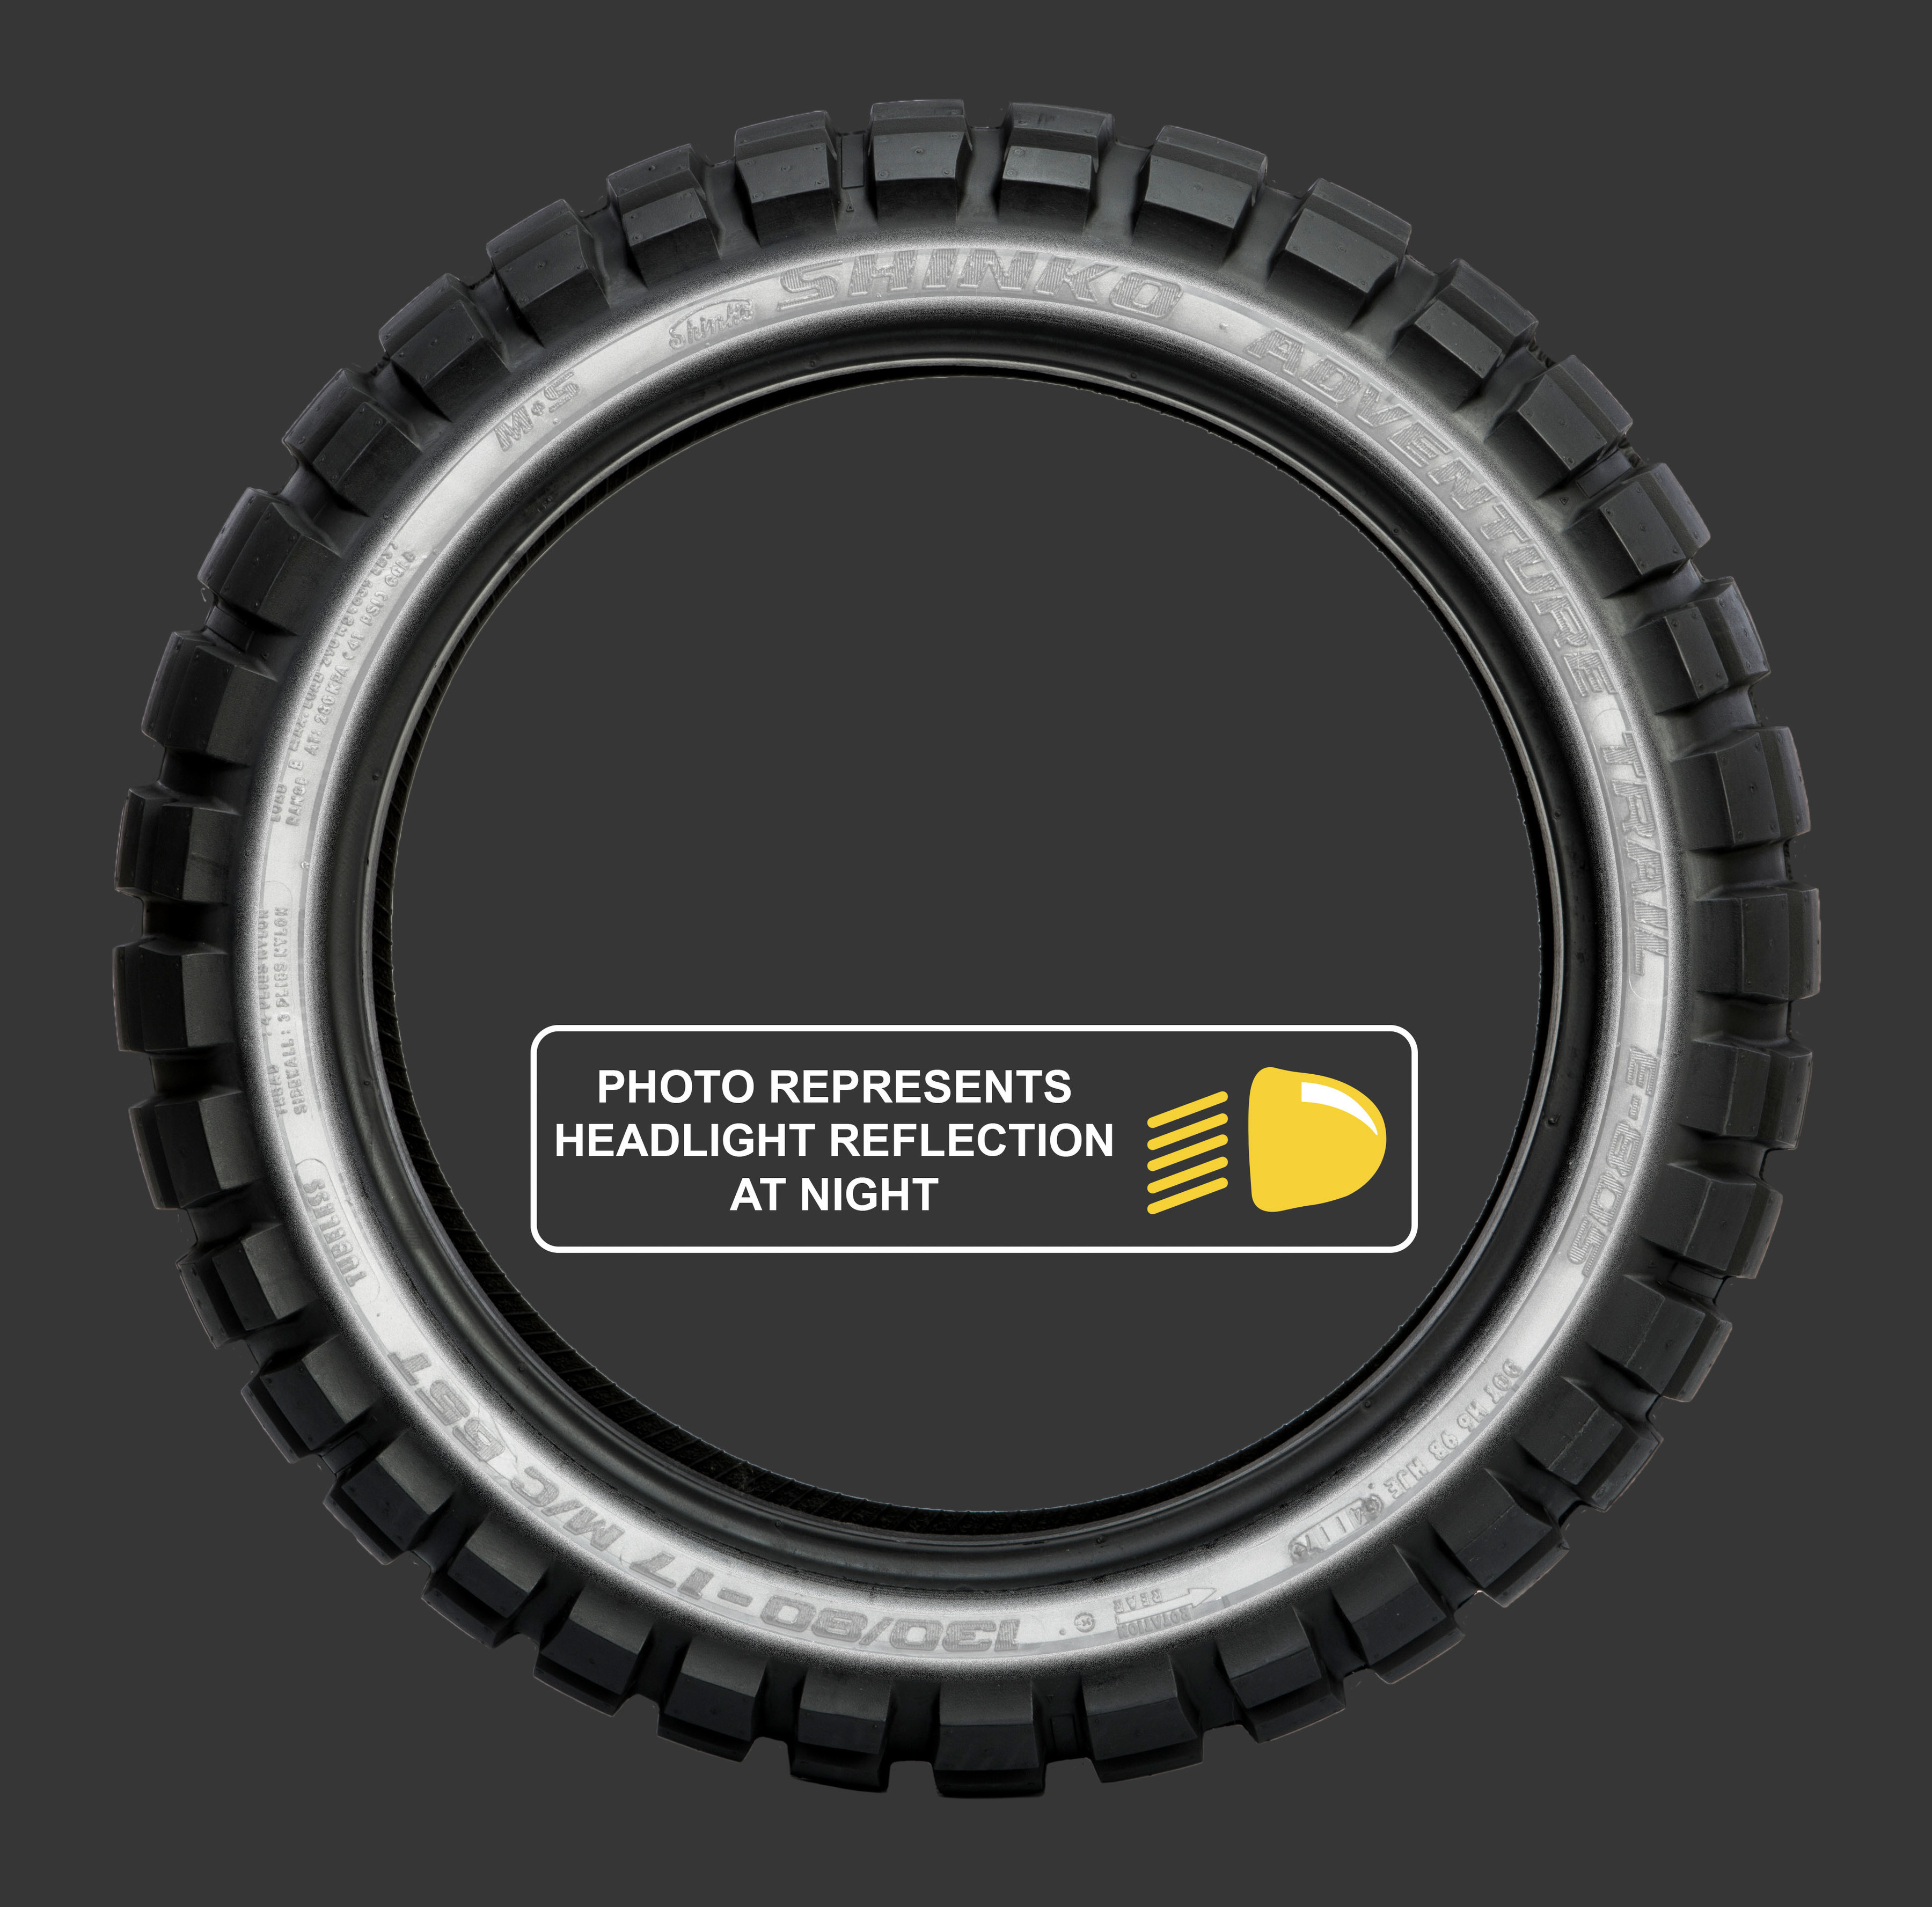 E805 Reflector Tire 150/70B18 70Q BELTED BIAS Rear Adventure Trail Series - Click Image to Close